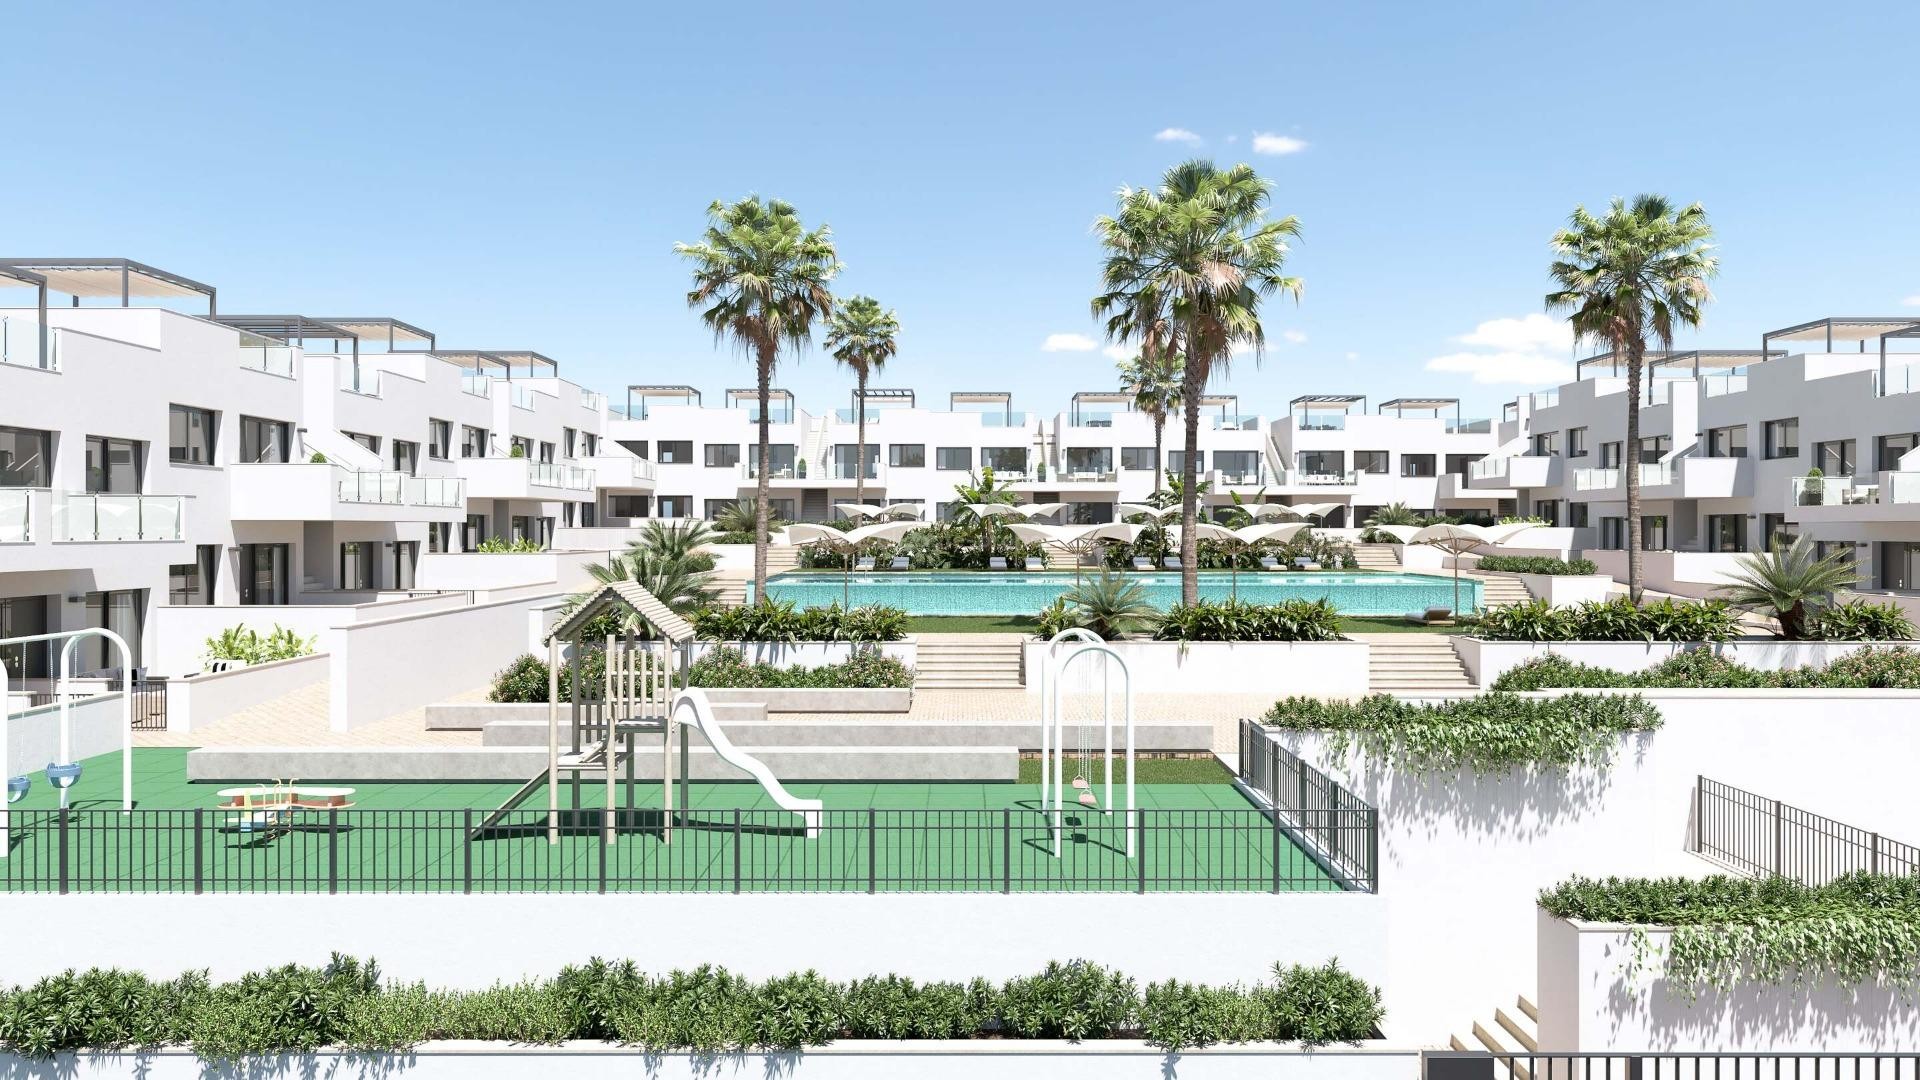 New bungalow apartments in Los Balcones, Torrevieja, 2/3 bedrooms, 2 bathrooms, garden or balcony and solarium, shared infinity pool with panoramic views